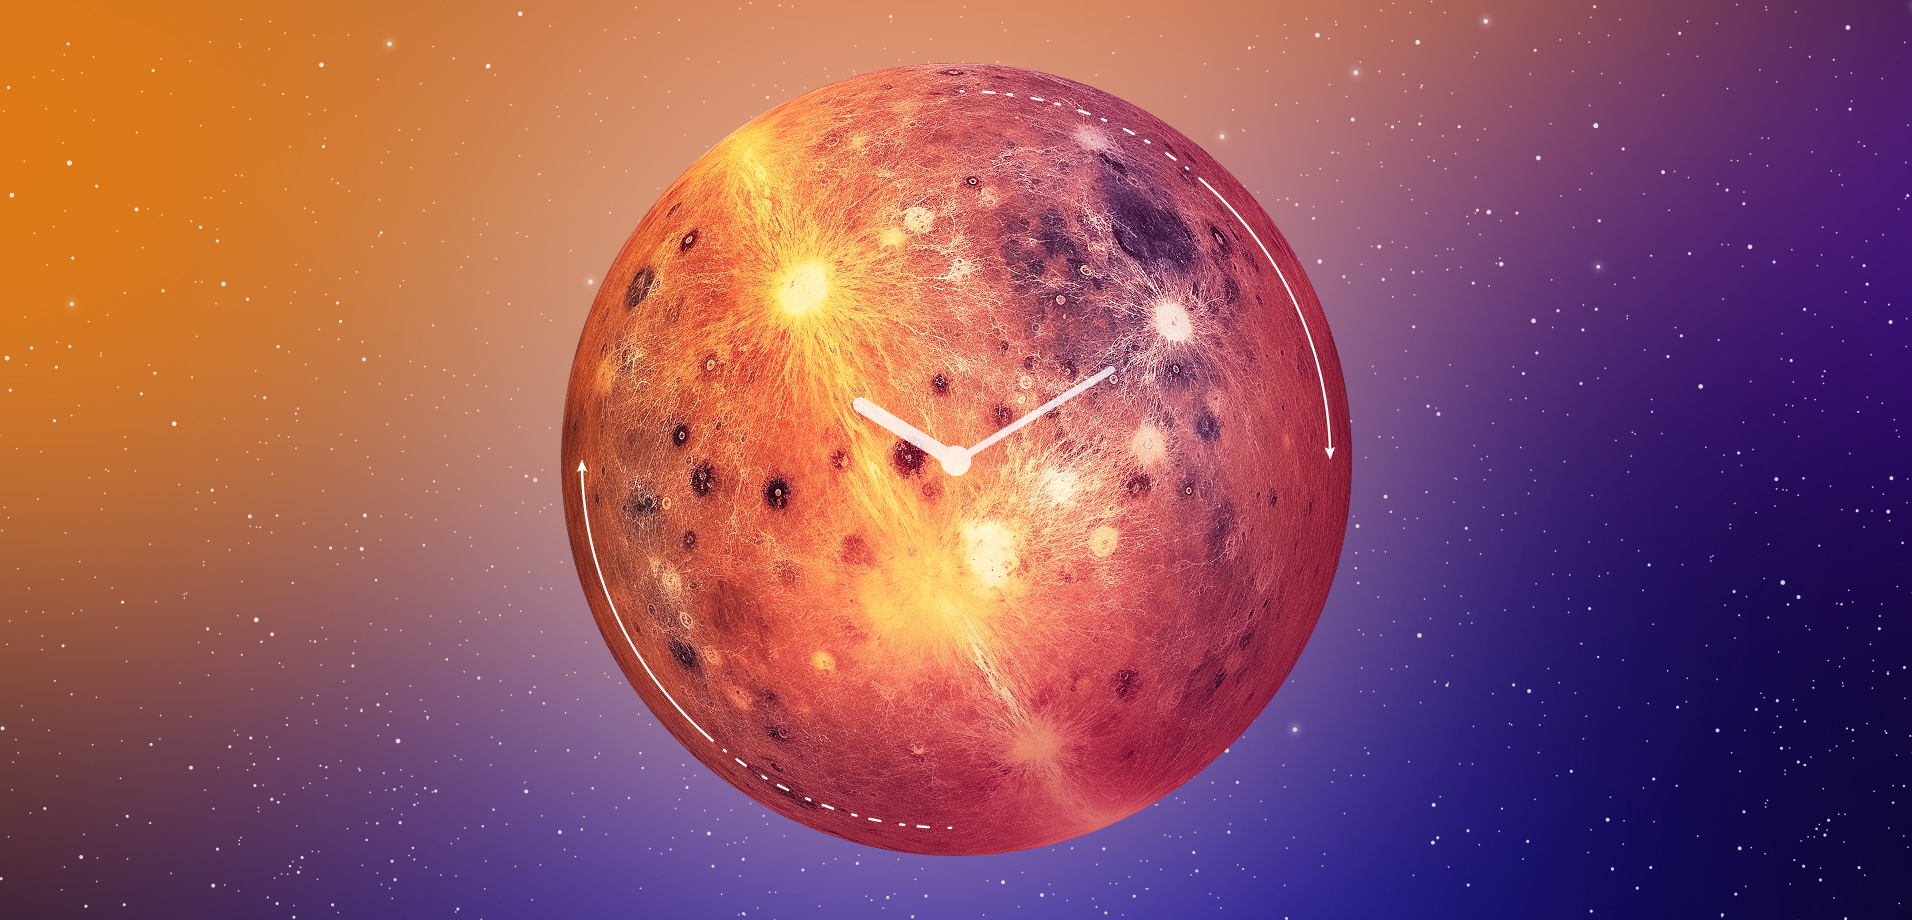 1000 hours to Noon: How long is a day on Mercury and why?